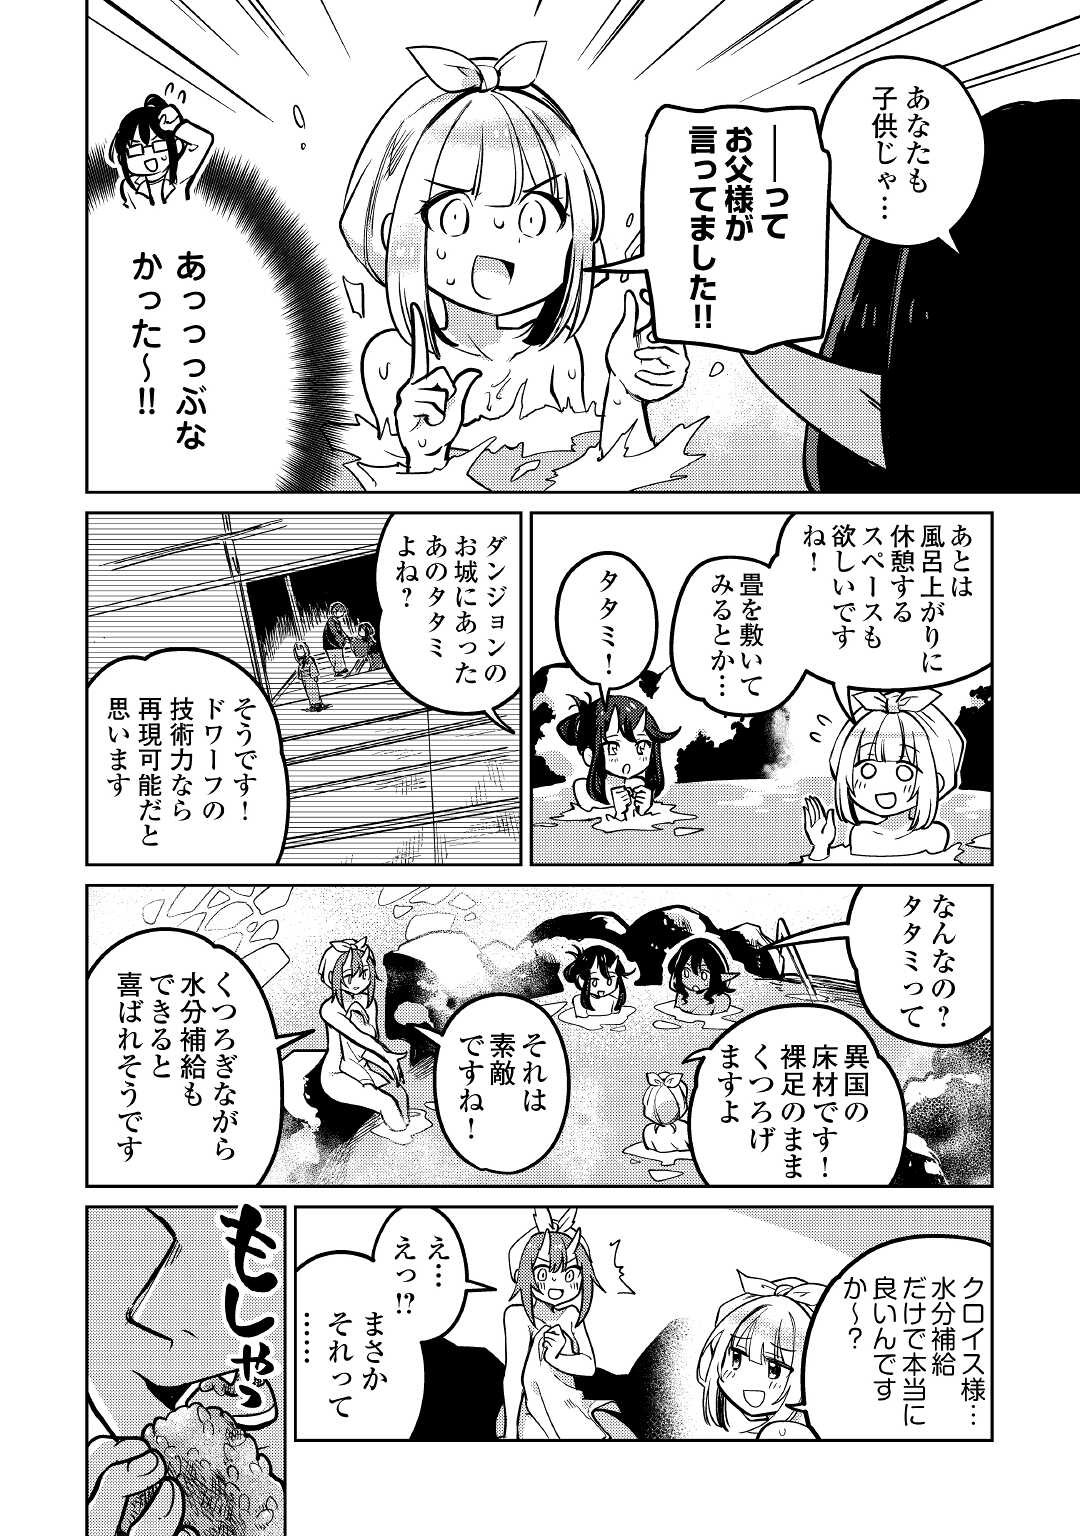 The Former Structural Researcher’s Story of Otherworldly Adventure 第41話 - Page 8